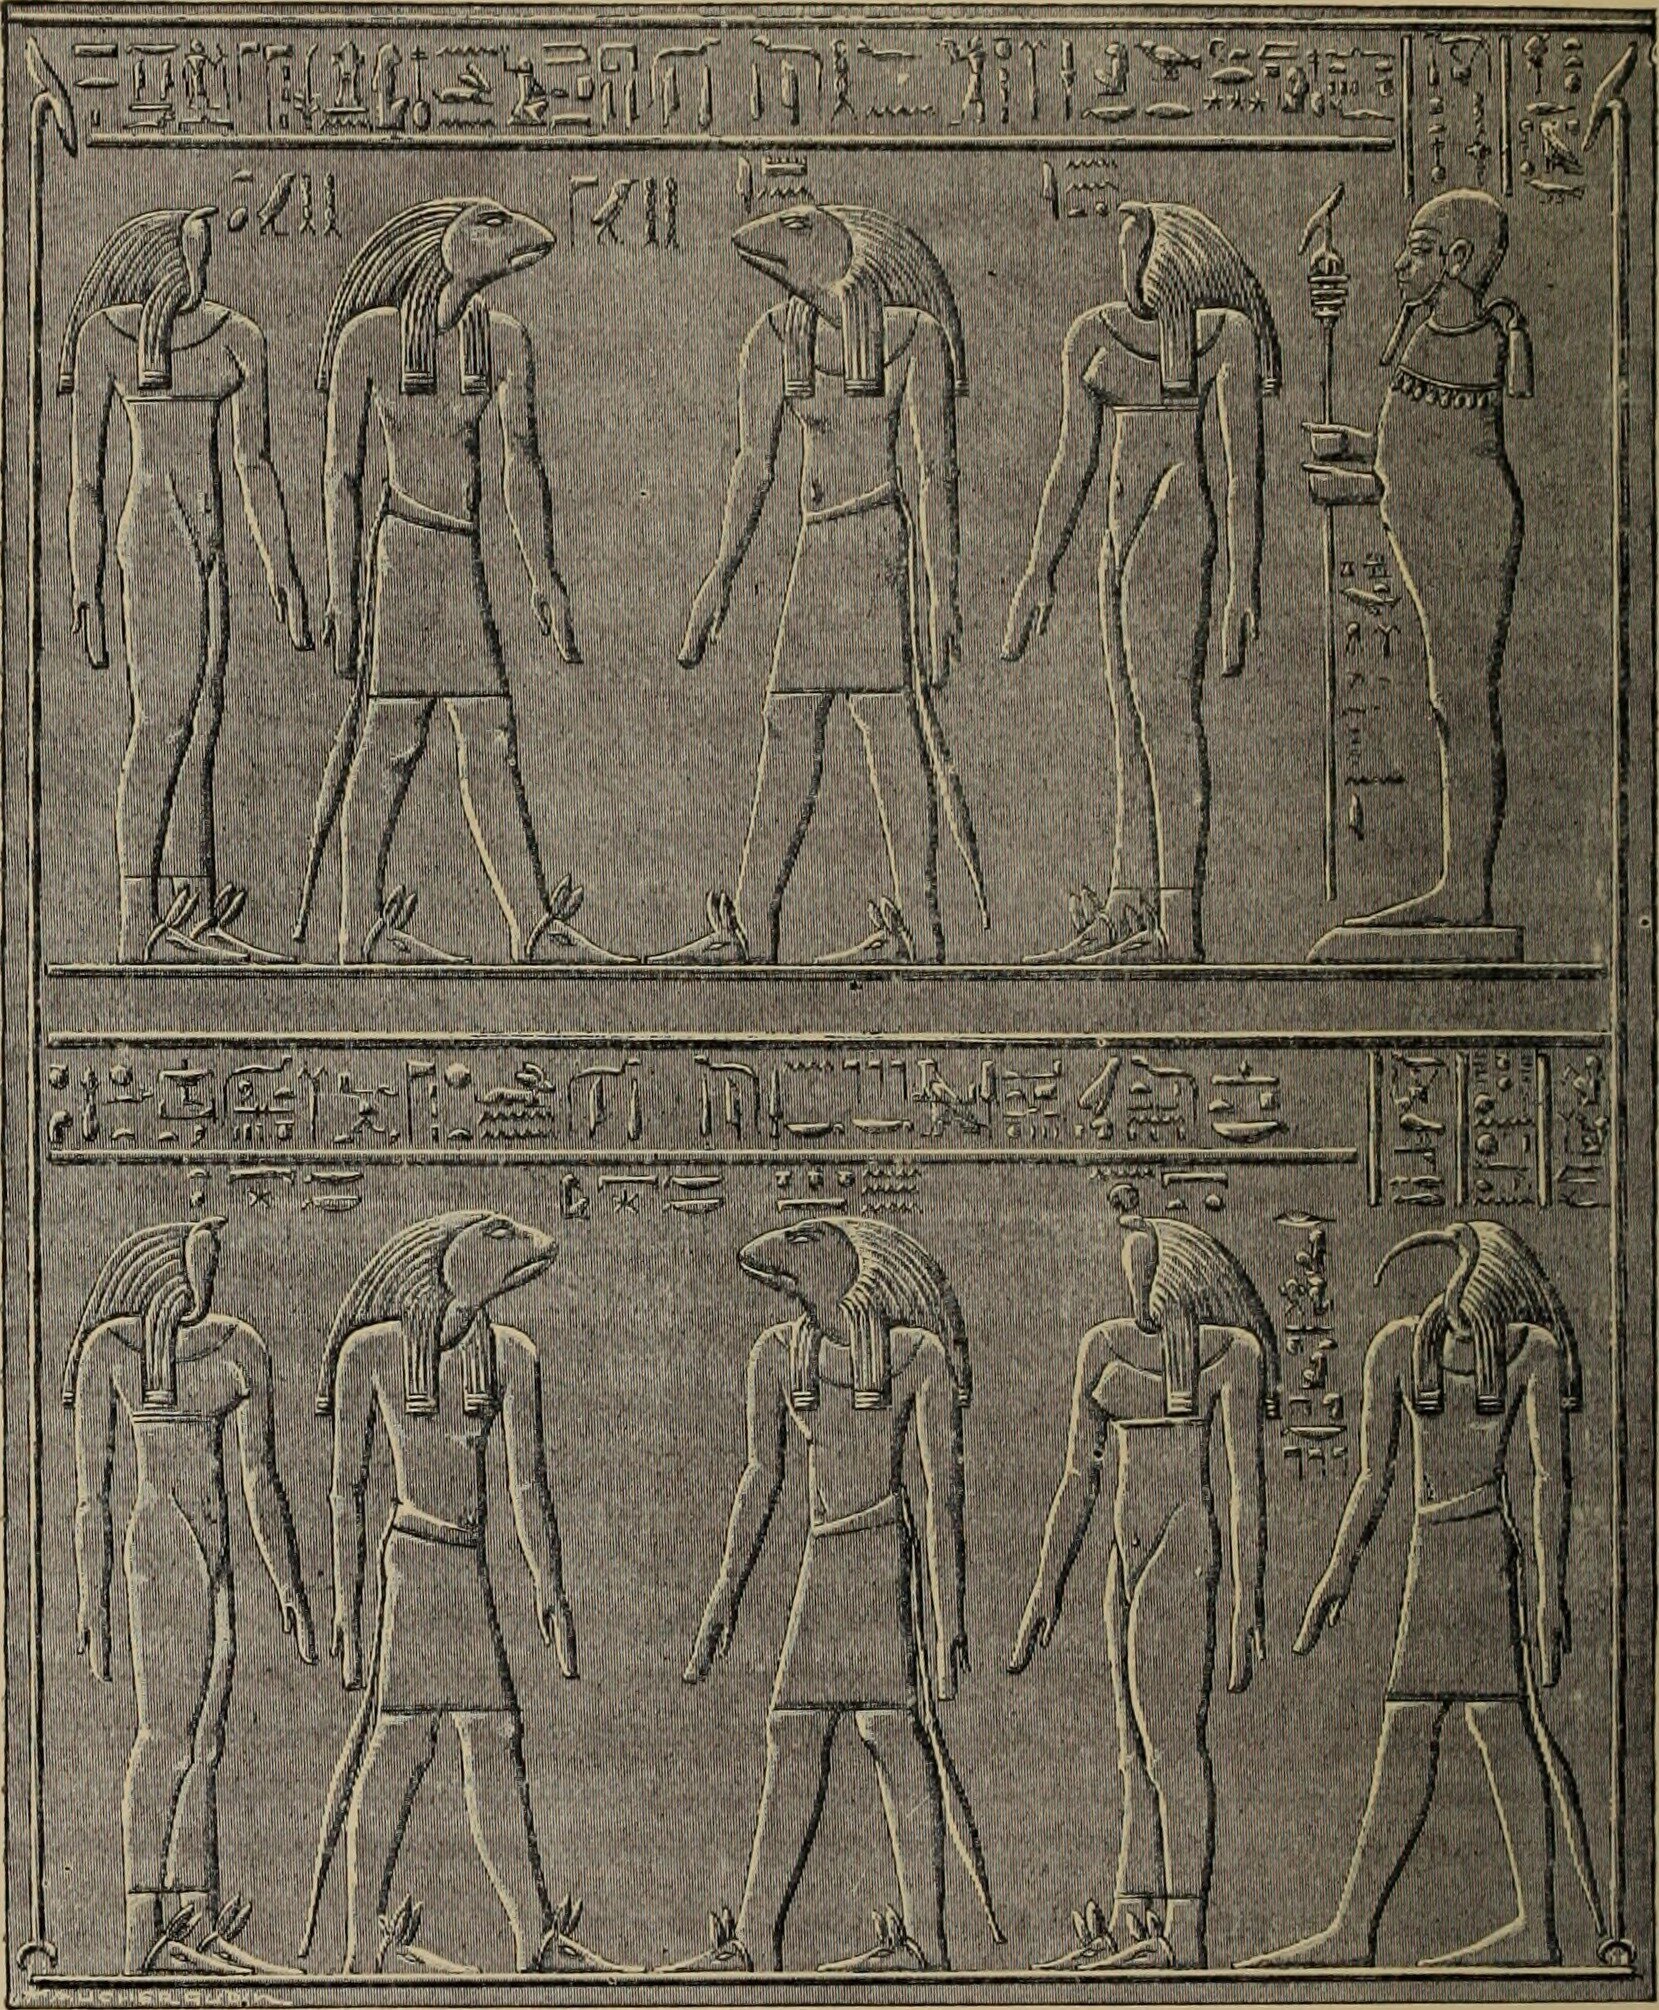 Arranged in two horizontal rows, each row shows two male and two female masked figures standing as couples and facing each other. An additional figure stands on the far right of each row, facing the couples.